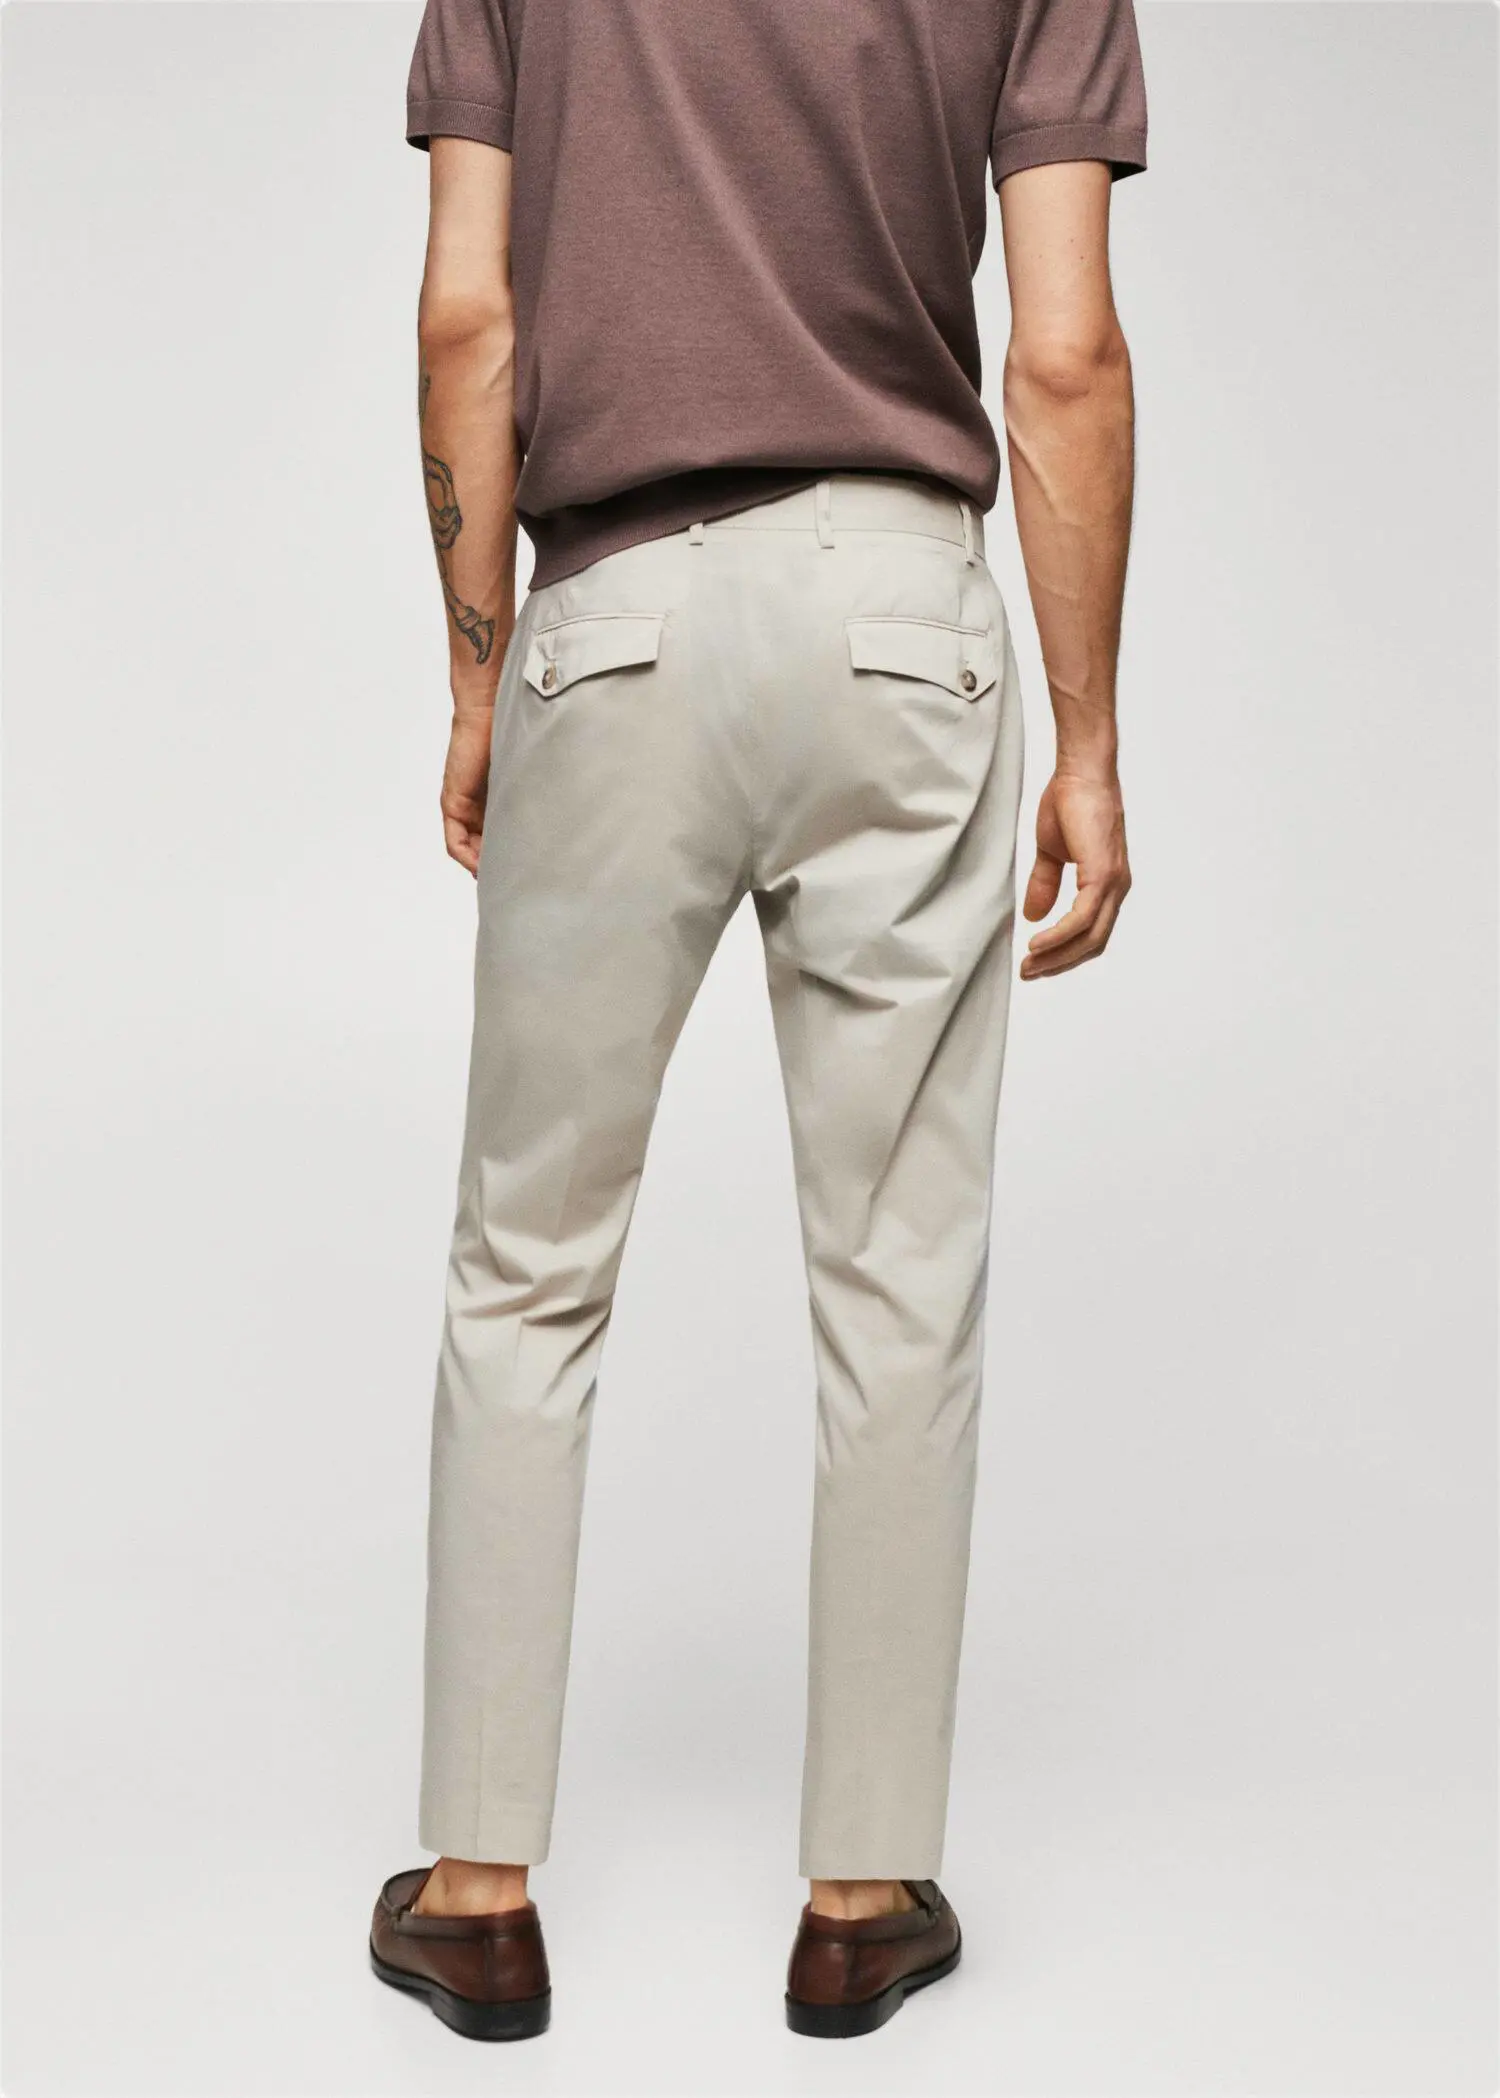 Mango Lightweight cotton trousers. a man wearing a brown t-shirt and a pair of white pants. 